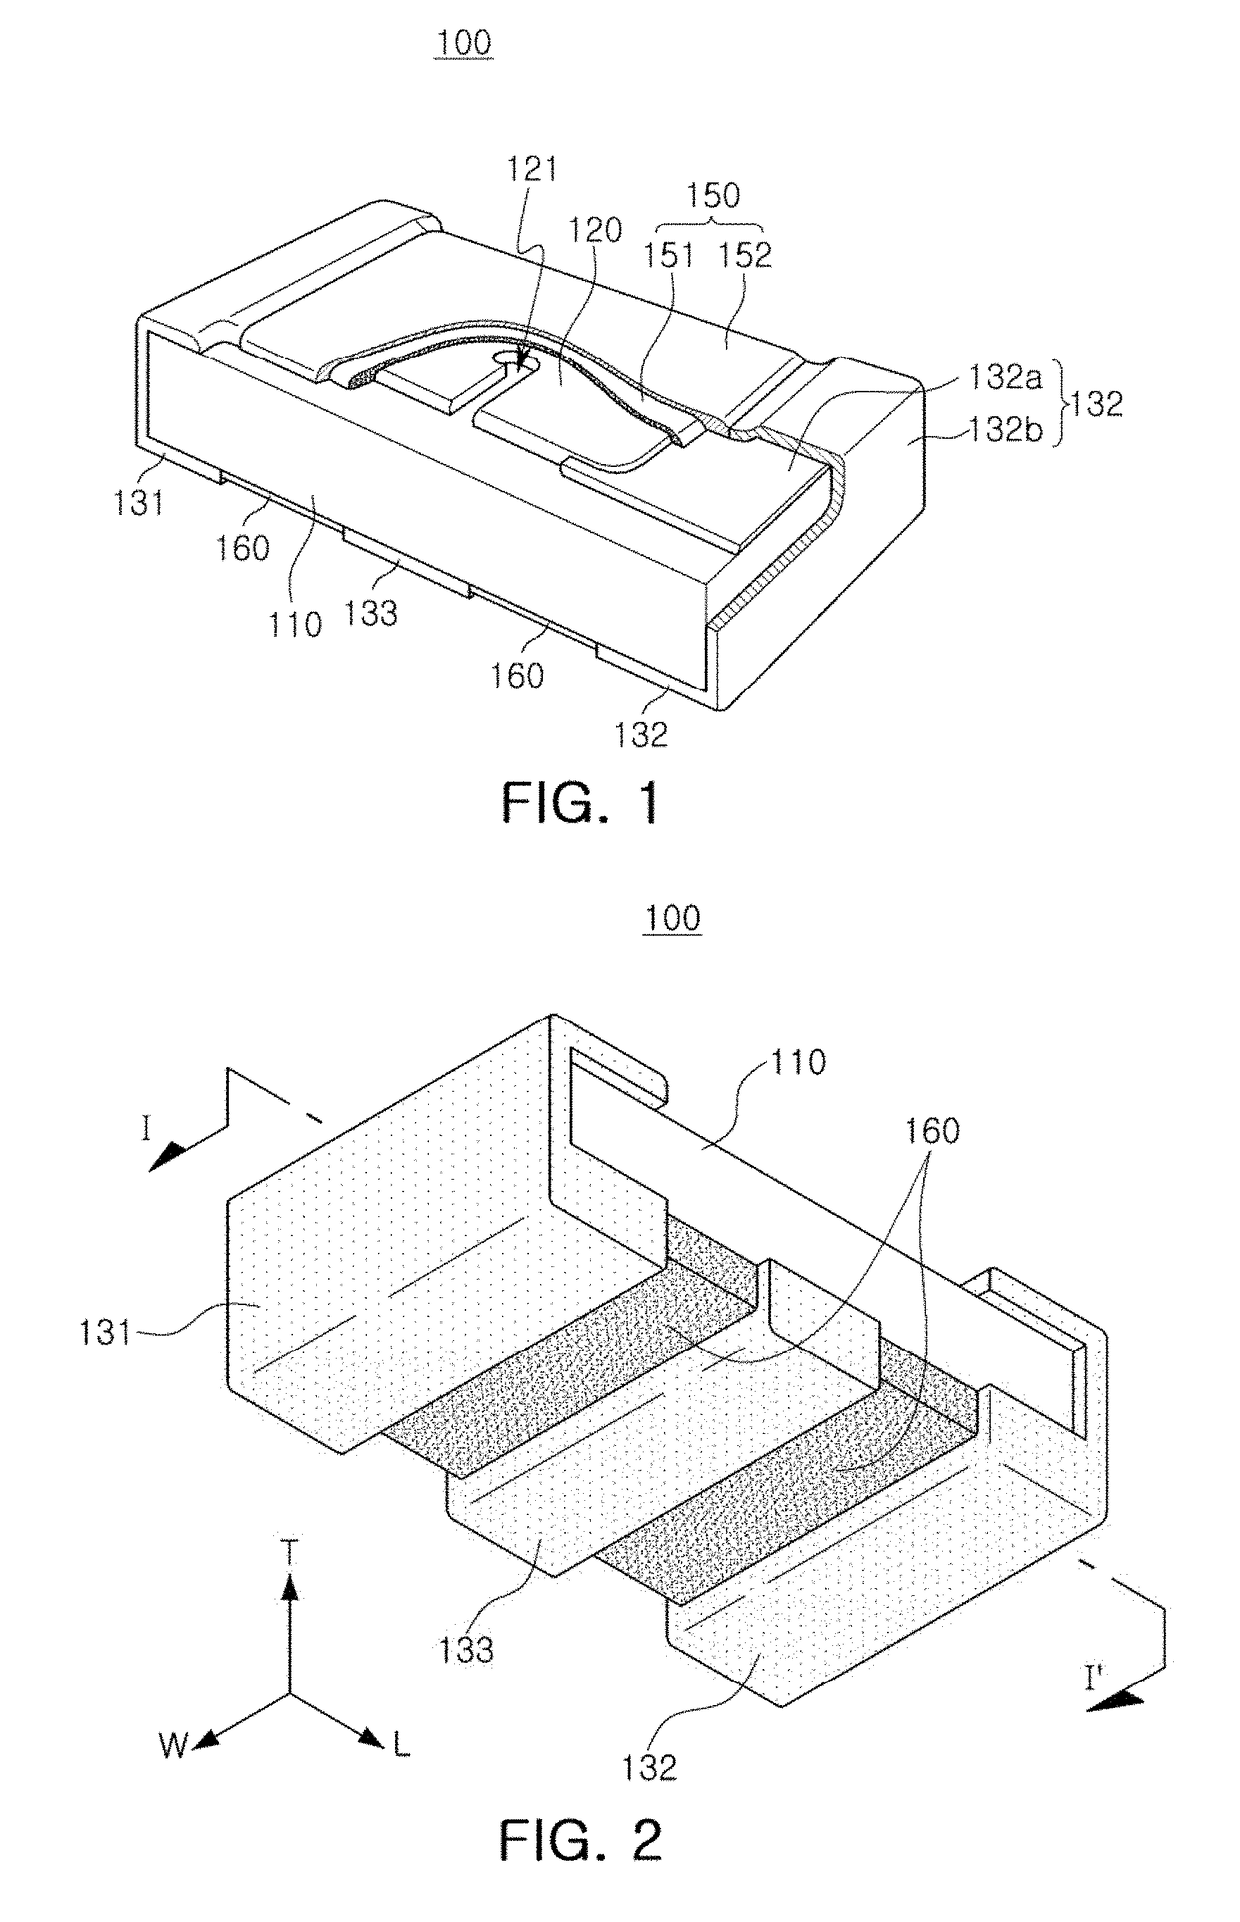 Resistor element and resistor element assembly